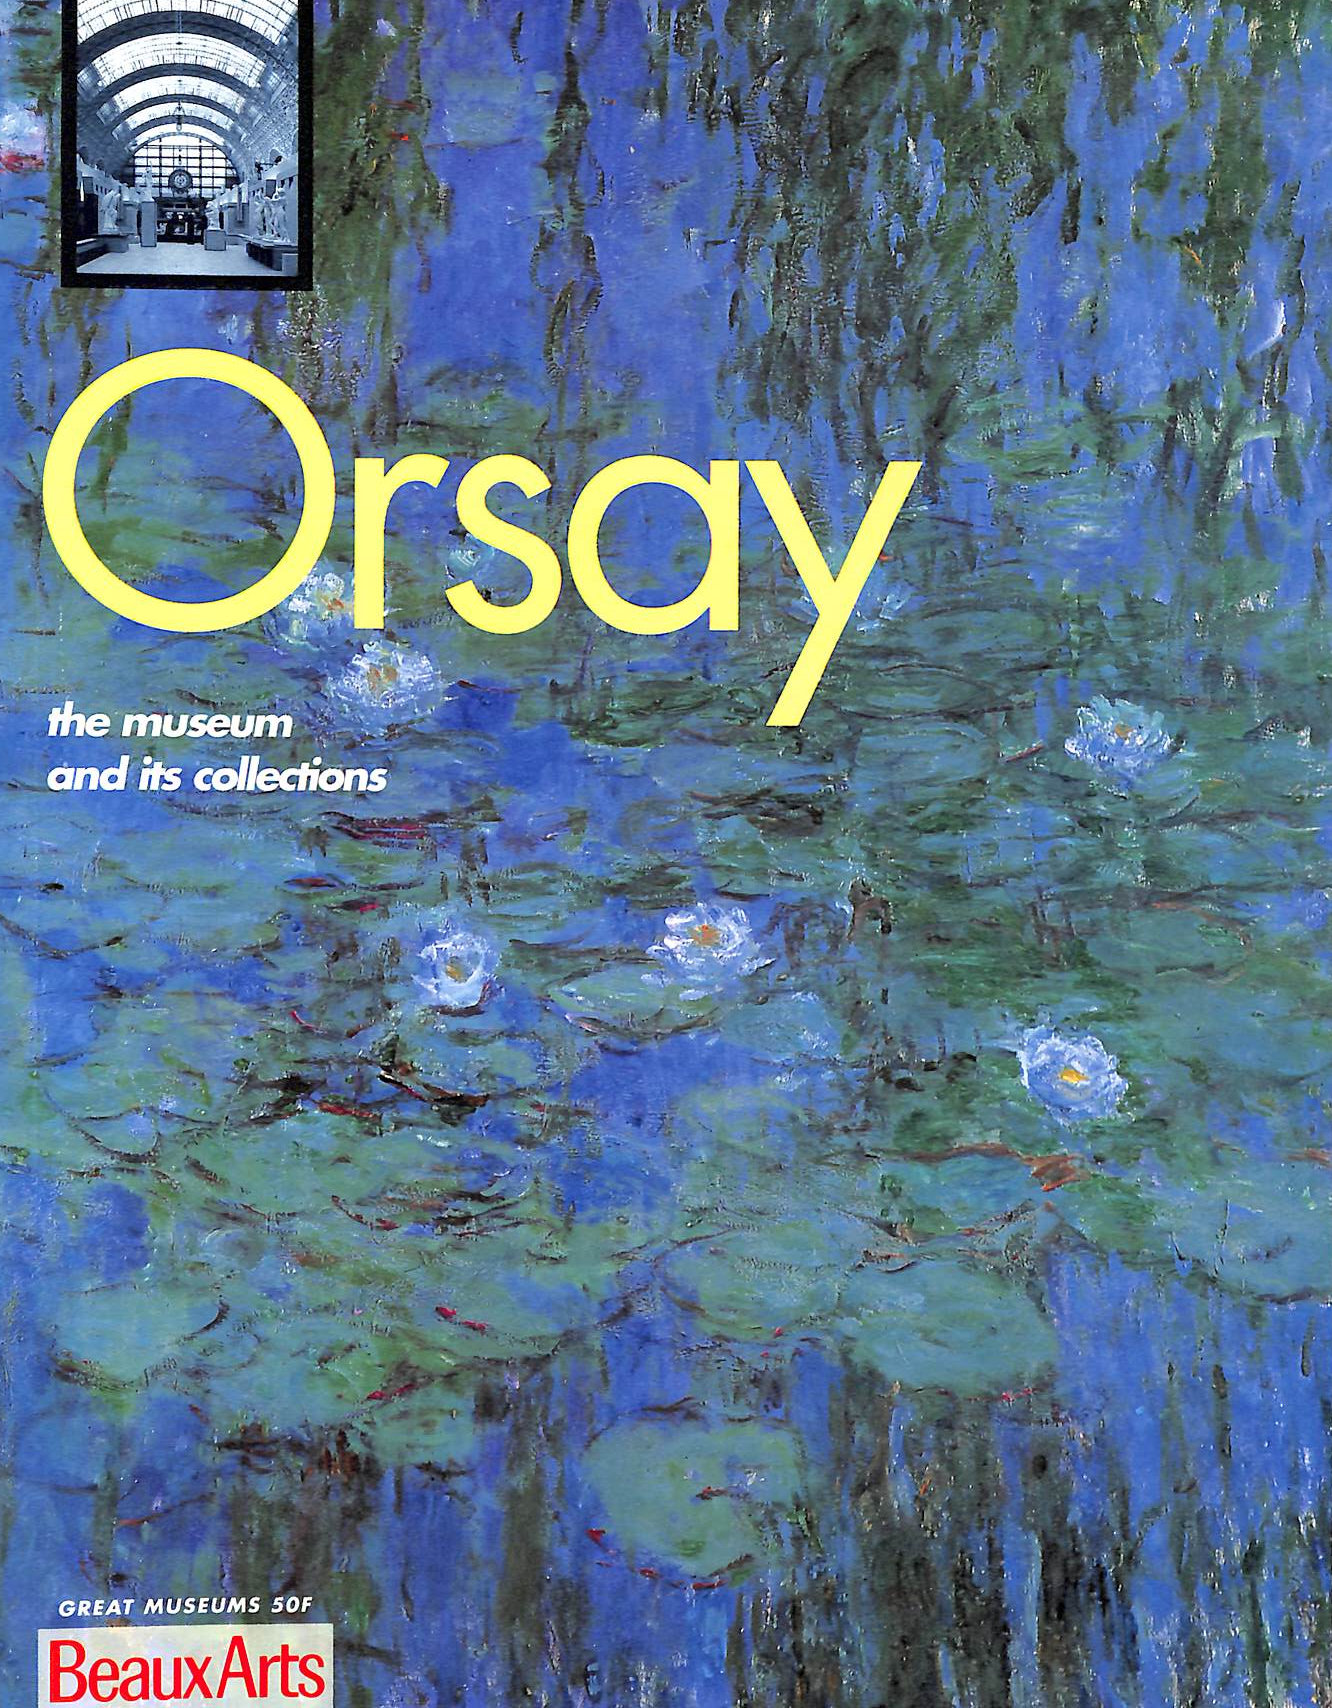 JEAN-NOEL BEYLER [EDITOR] - Orsay ; The Museum And Its Collections (Beaux Arts)